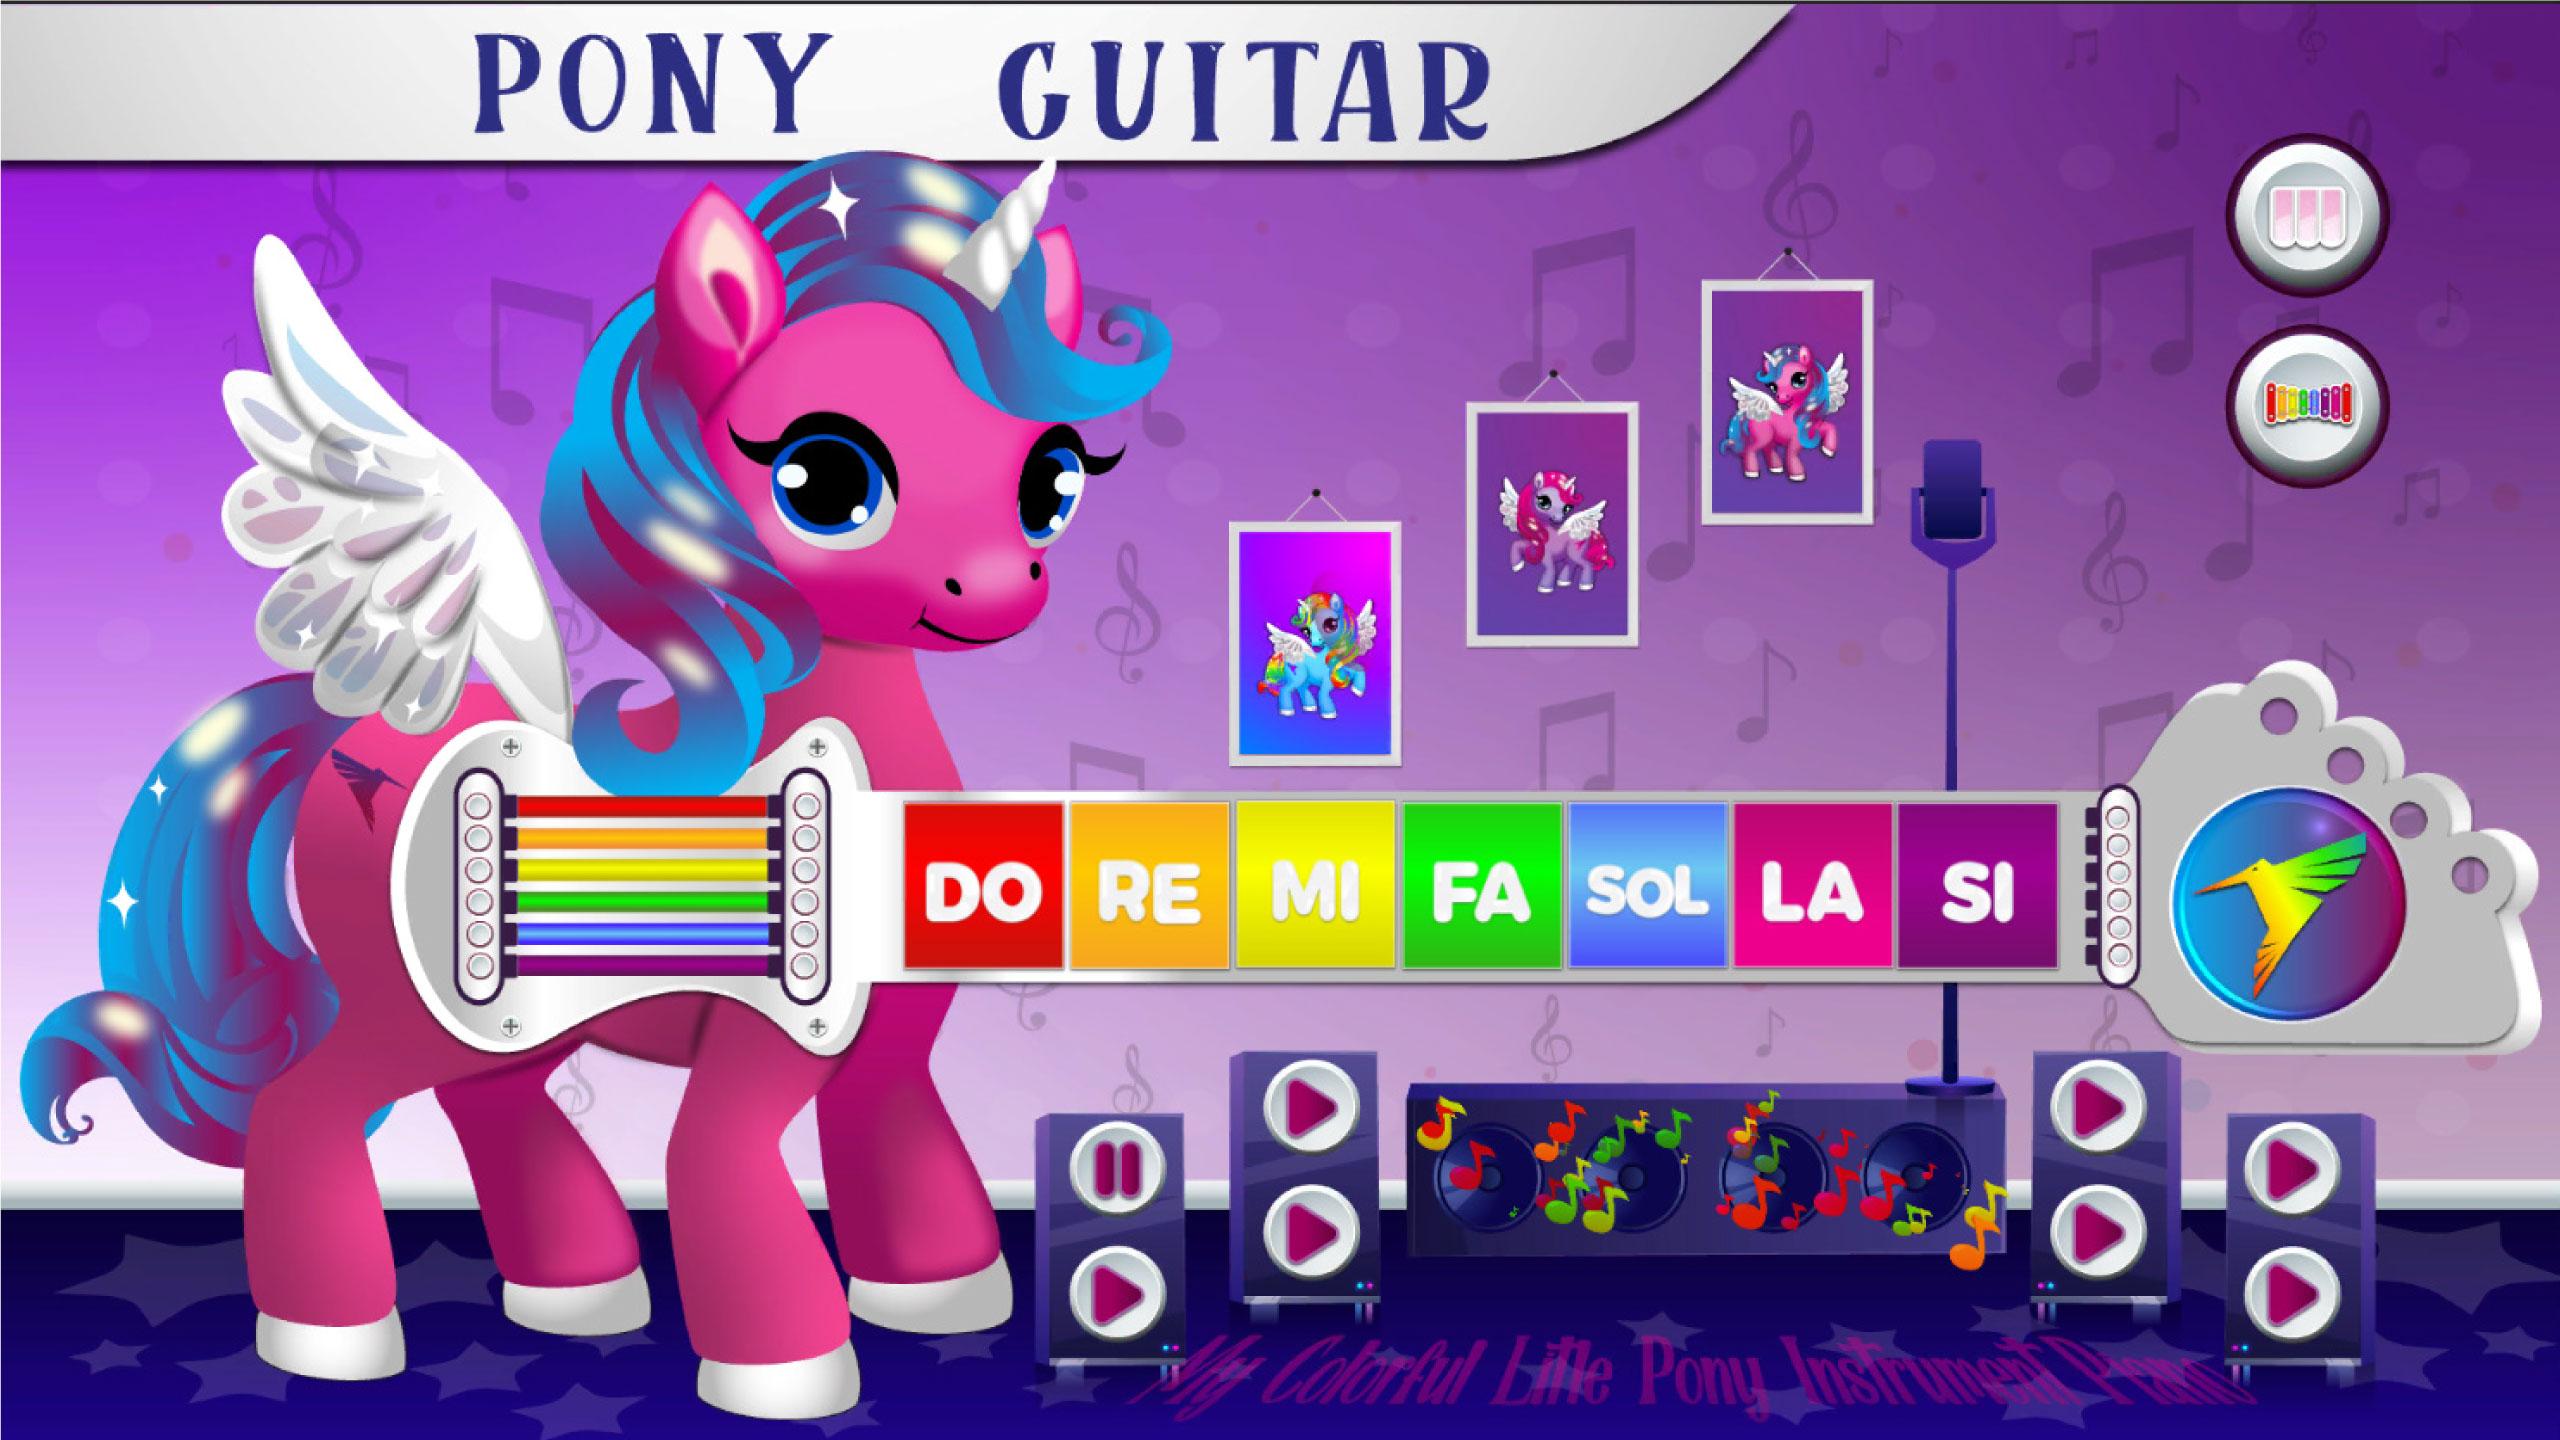 My Colorful Litle Pony Instrument - Piano 2.0 Screenshot 6